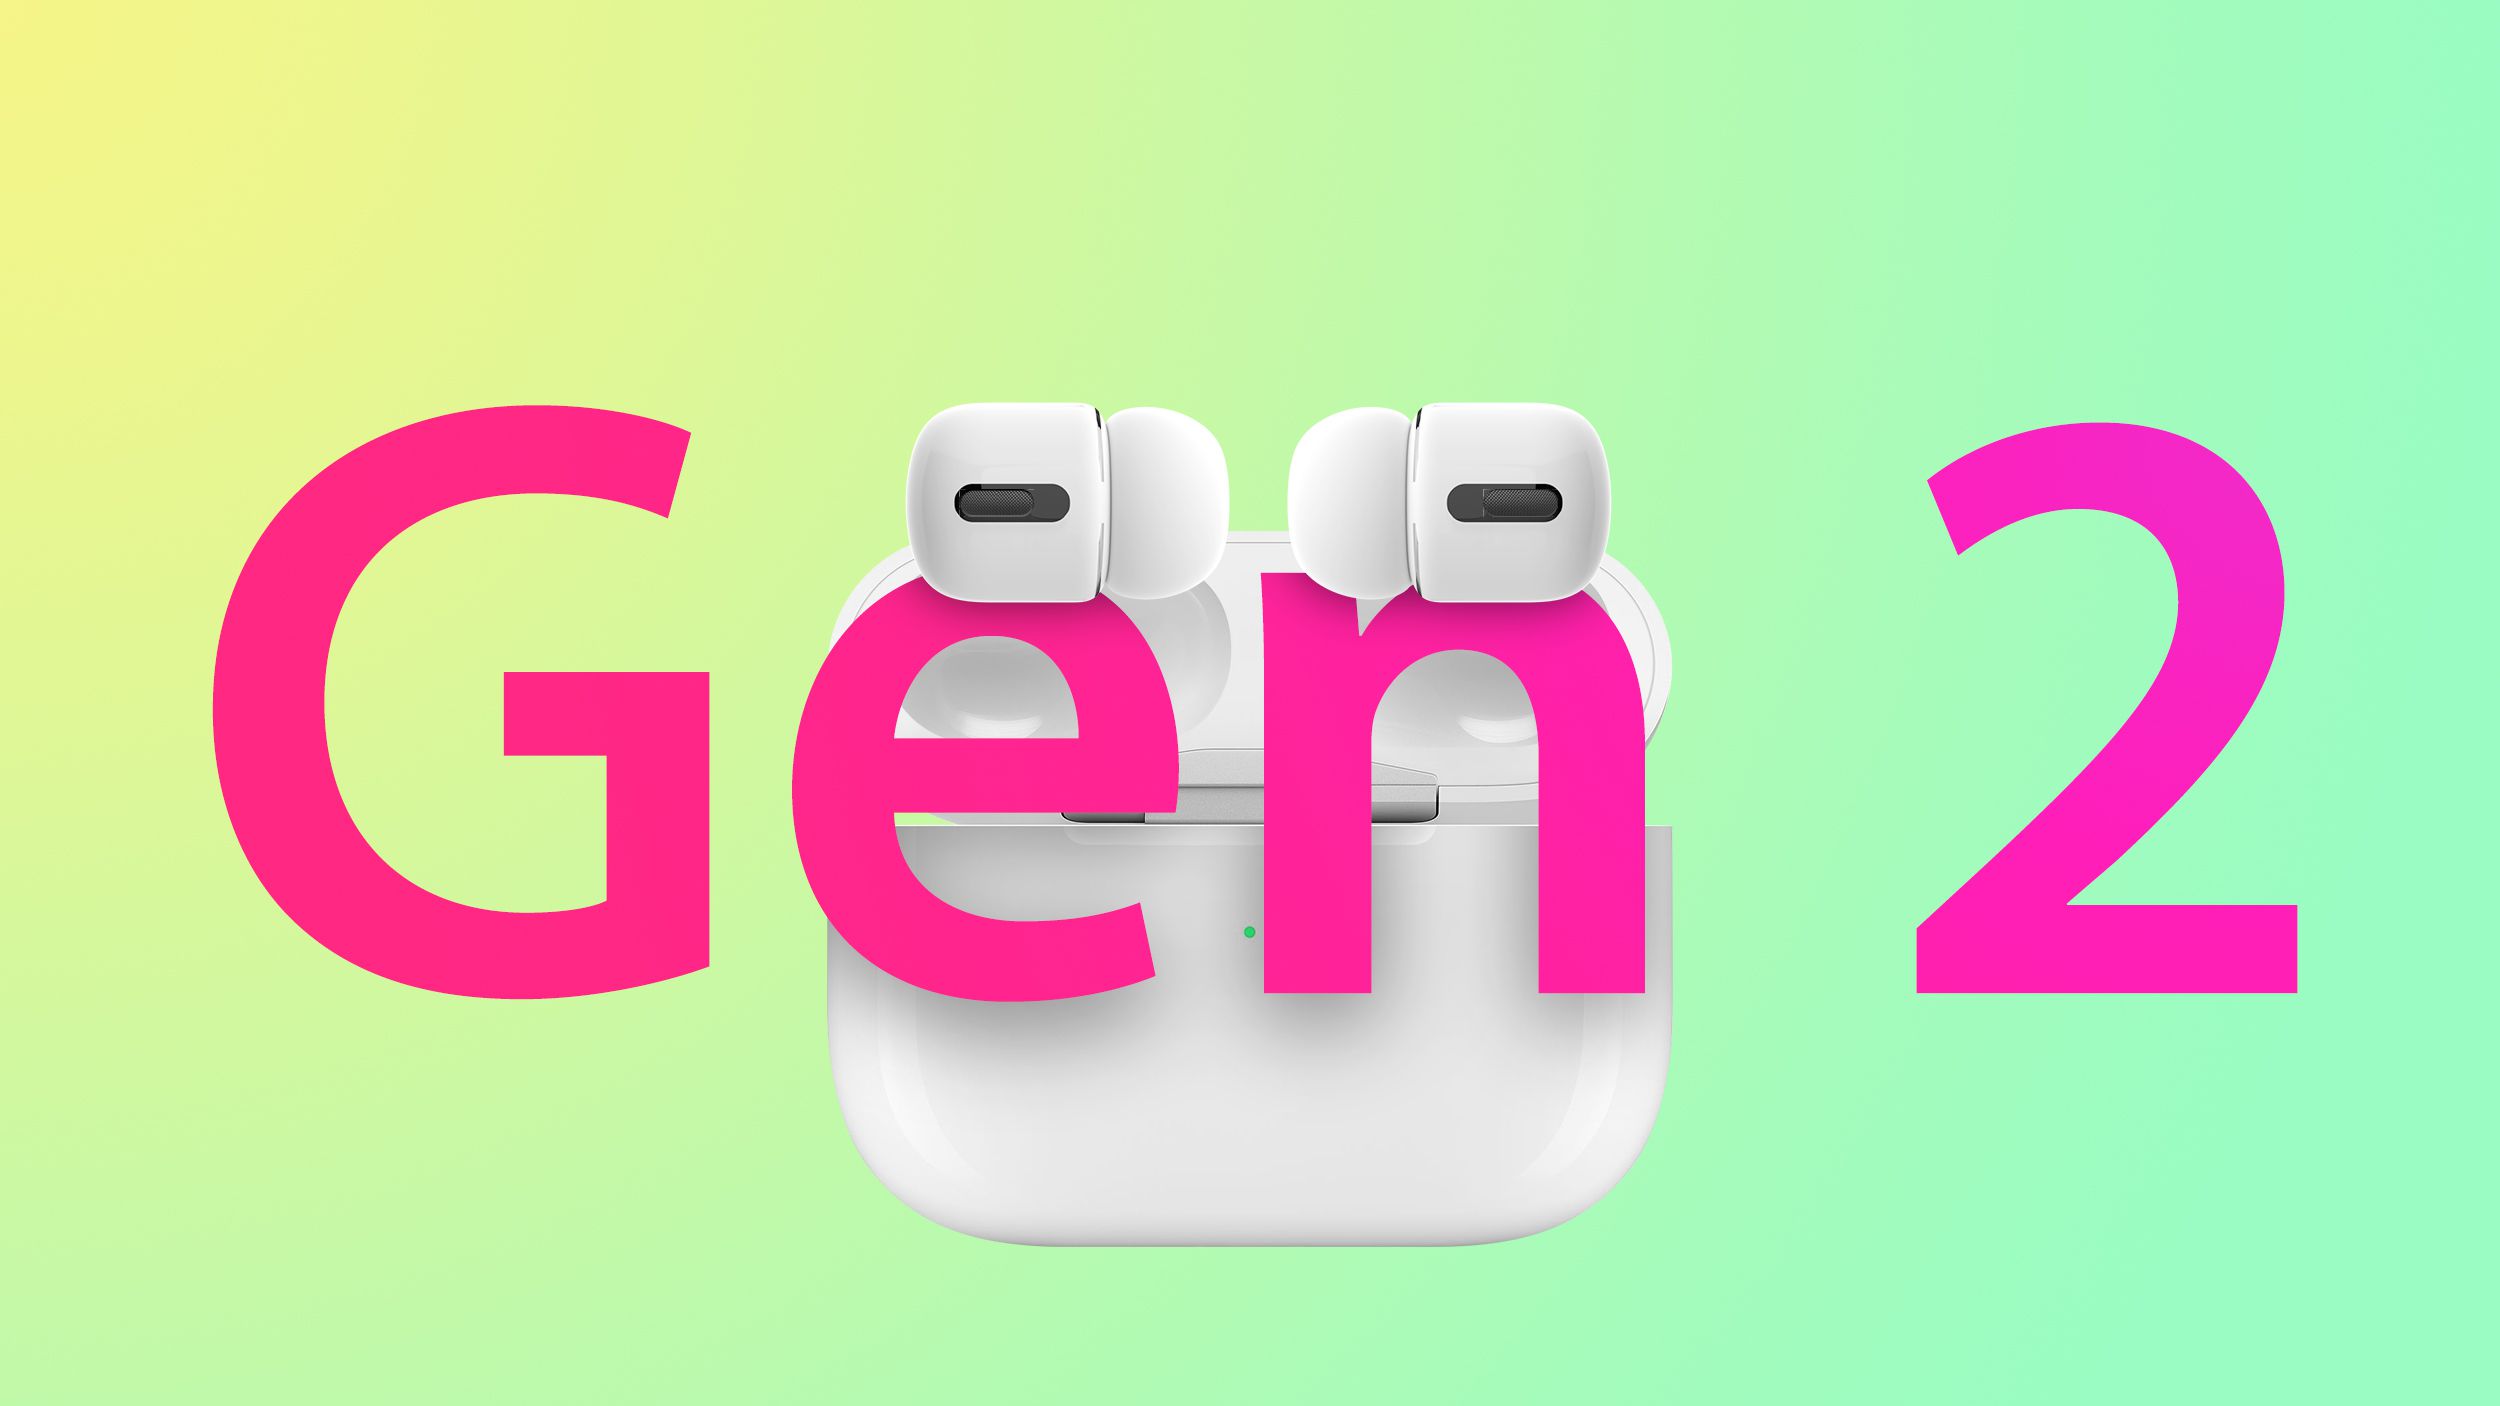 Second-generation AirPods Pro is widely rumored to launch in the first half of 2021